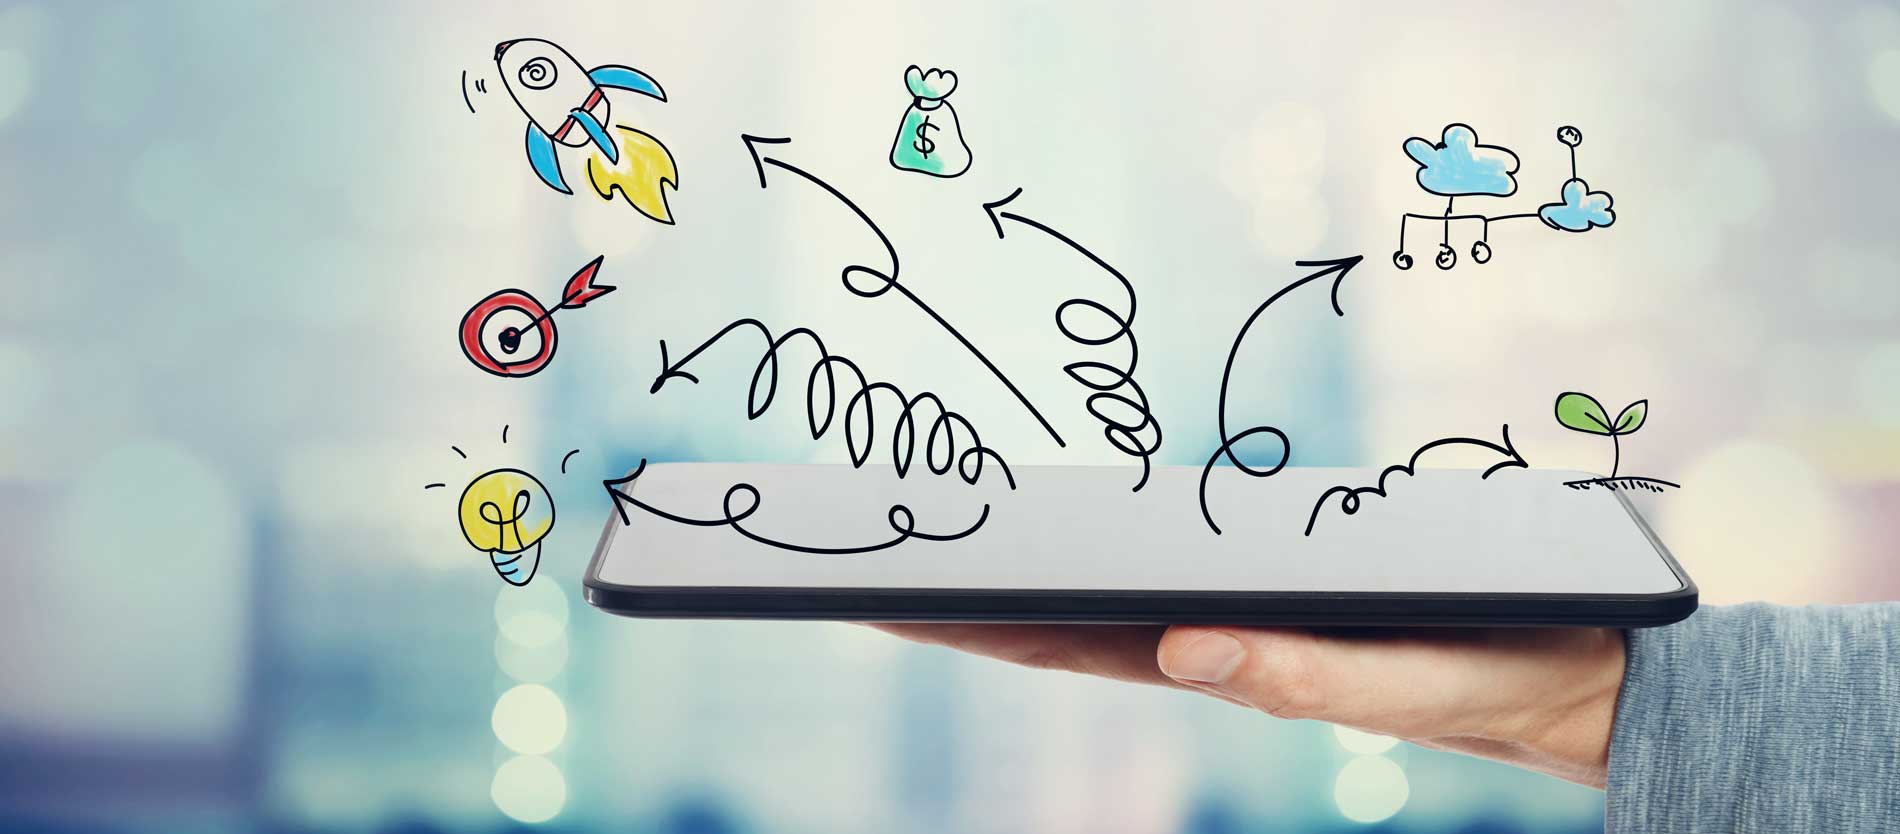 A picture of a hand holding a tablet with hand-drawn images drawn like doodles jumping off of it. Showing how vision and mission statements inspire strategic plans.